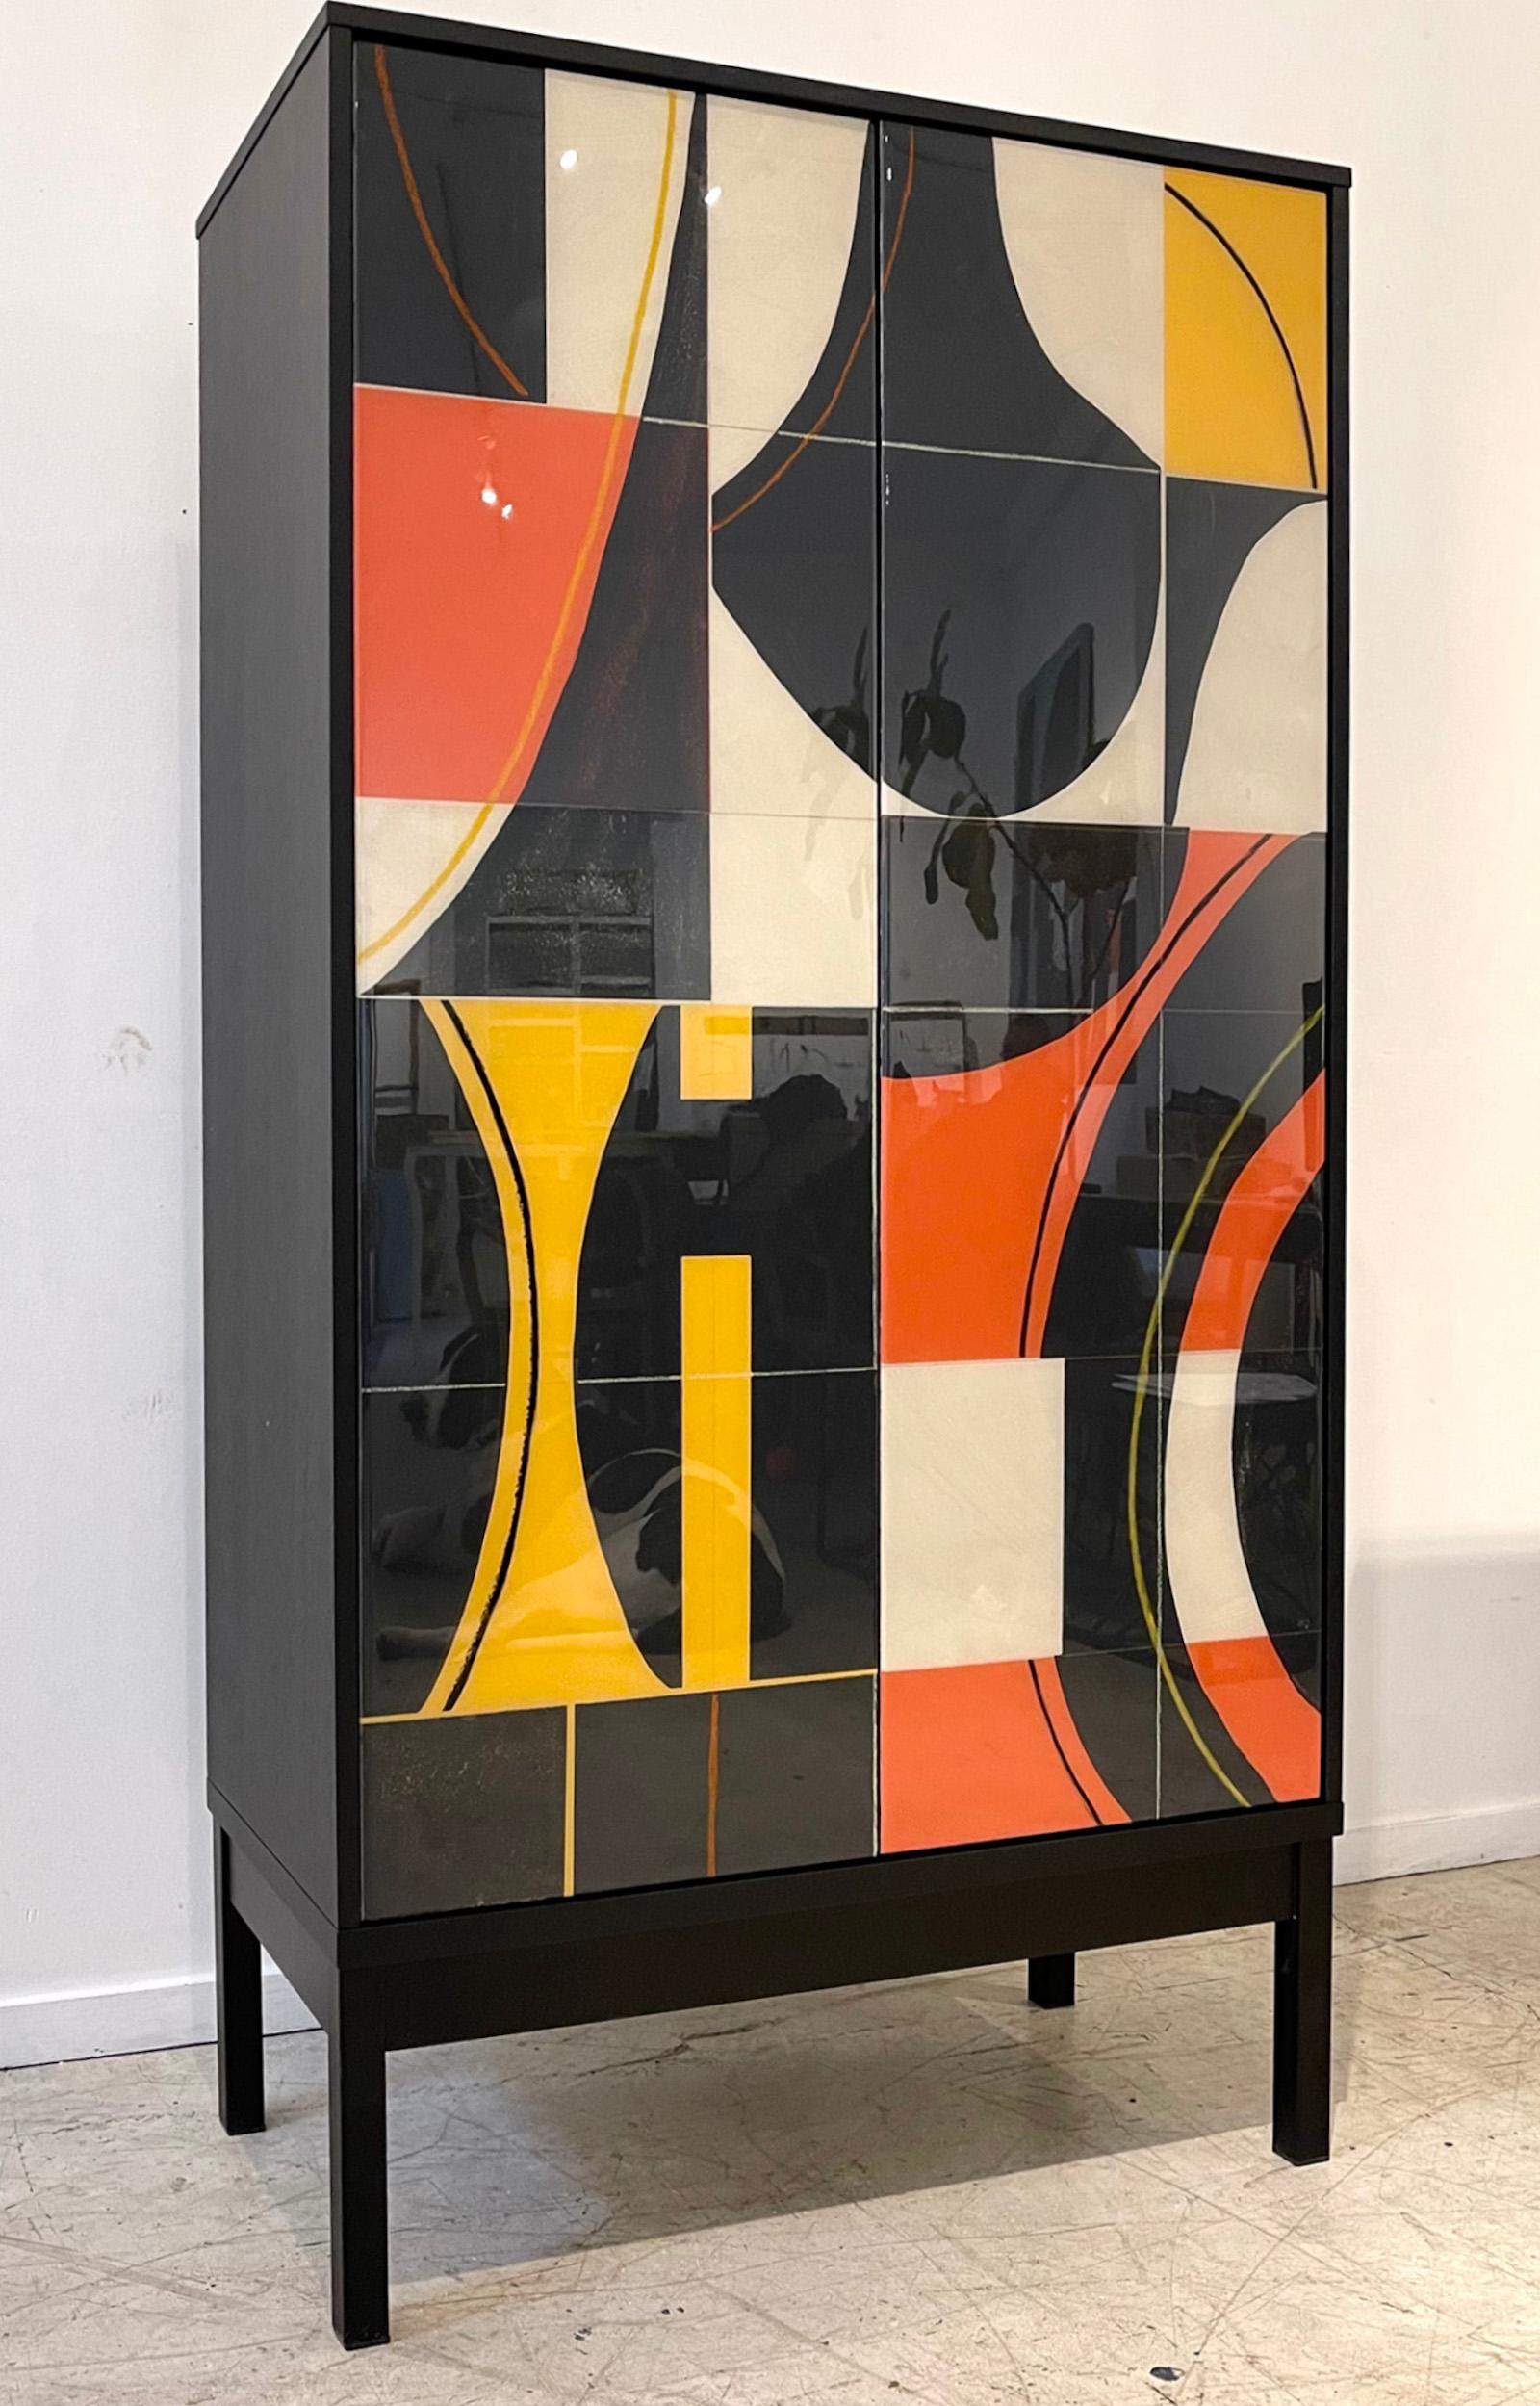 The Bossa Armoire is designed and created in our Toronto studio, Morgan Clayhall. The artwork on the doors is by the artist, Murray Duncan

Bossa is a new bold series inspired by 1970s colour and Brazilian modernism. The organic shapes are emphasize